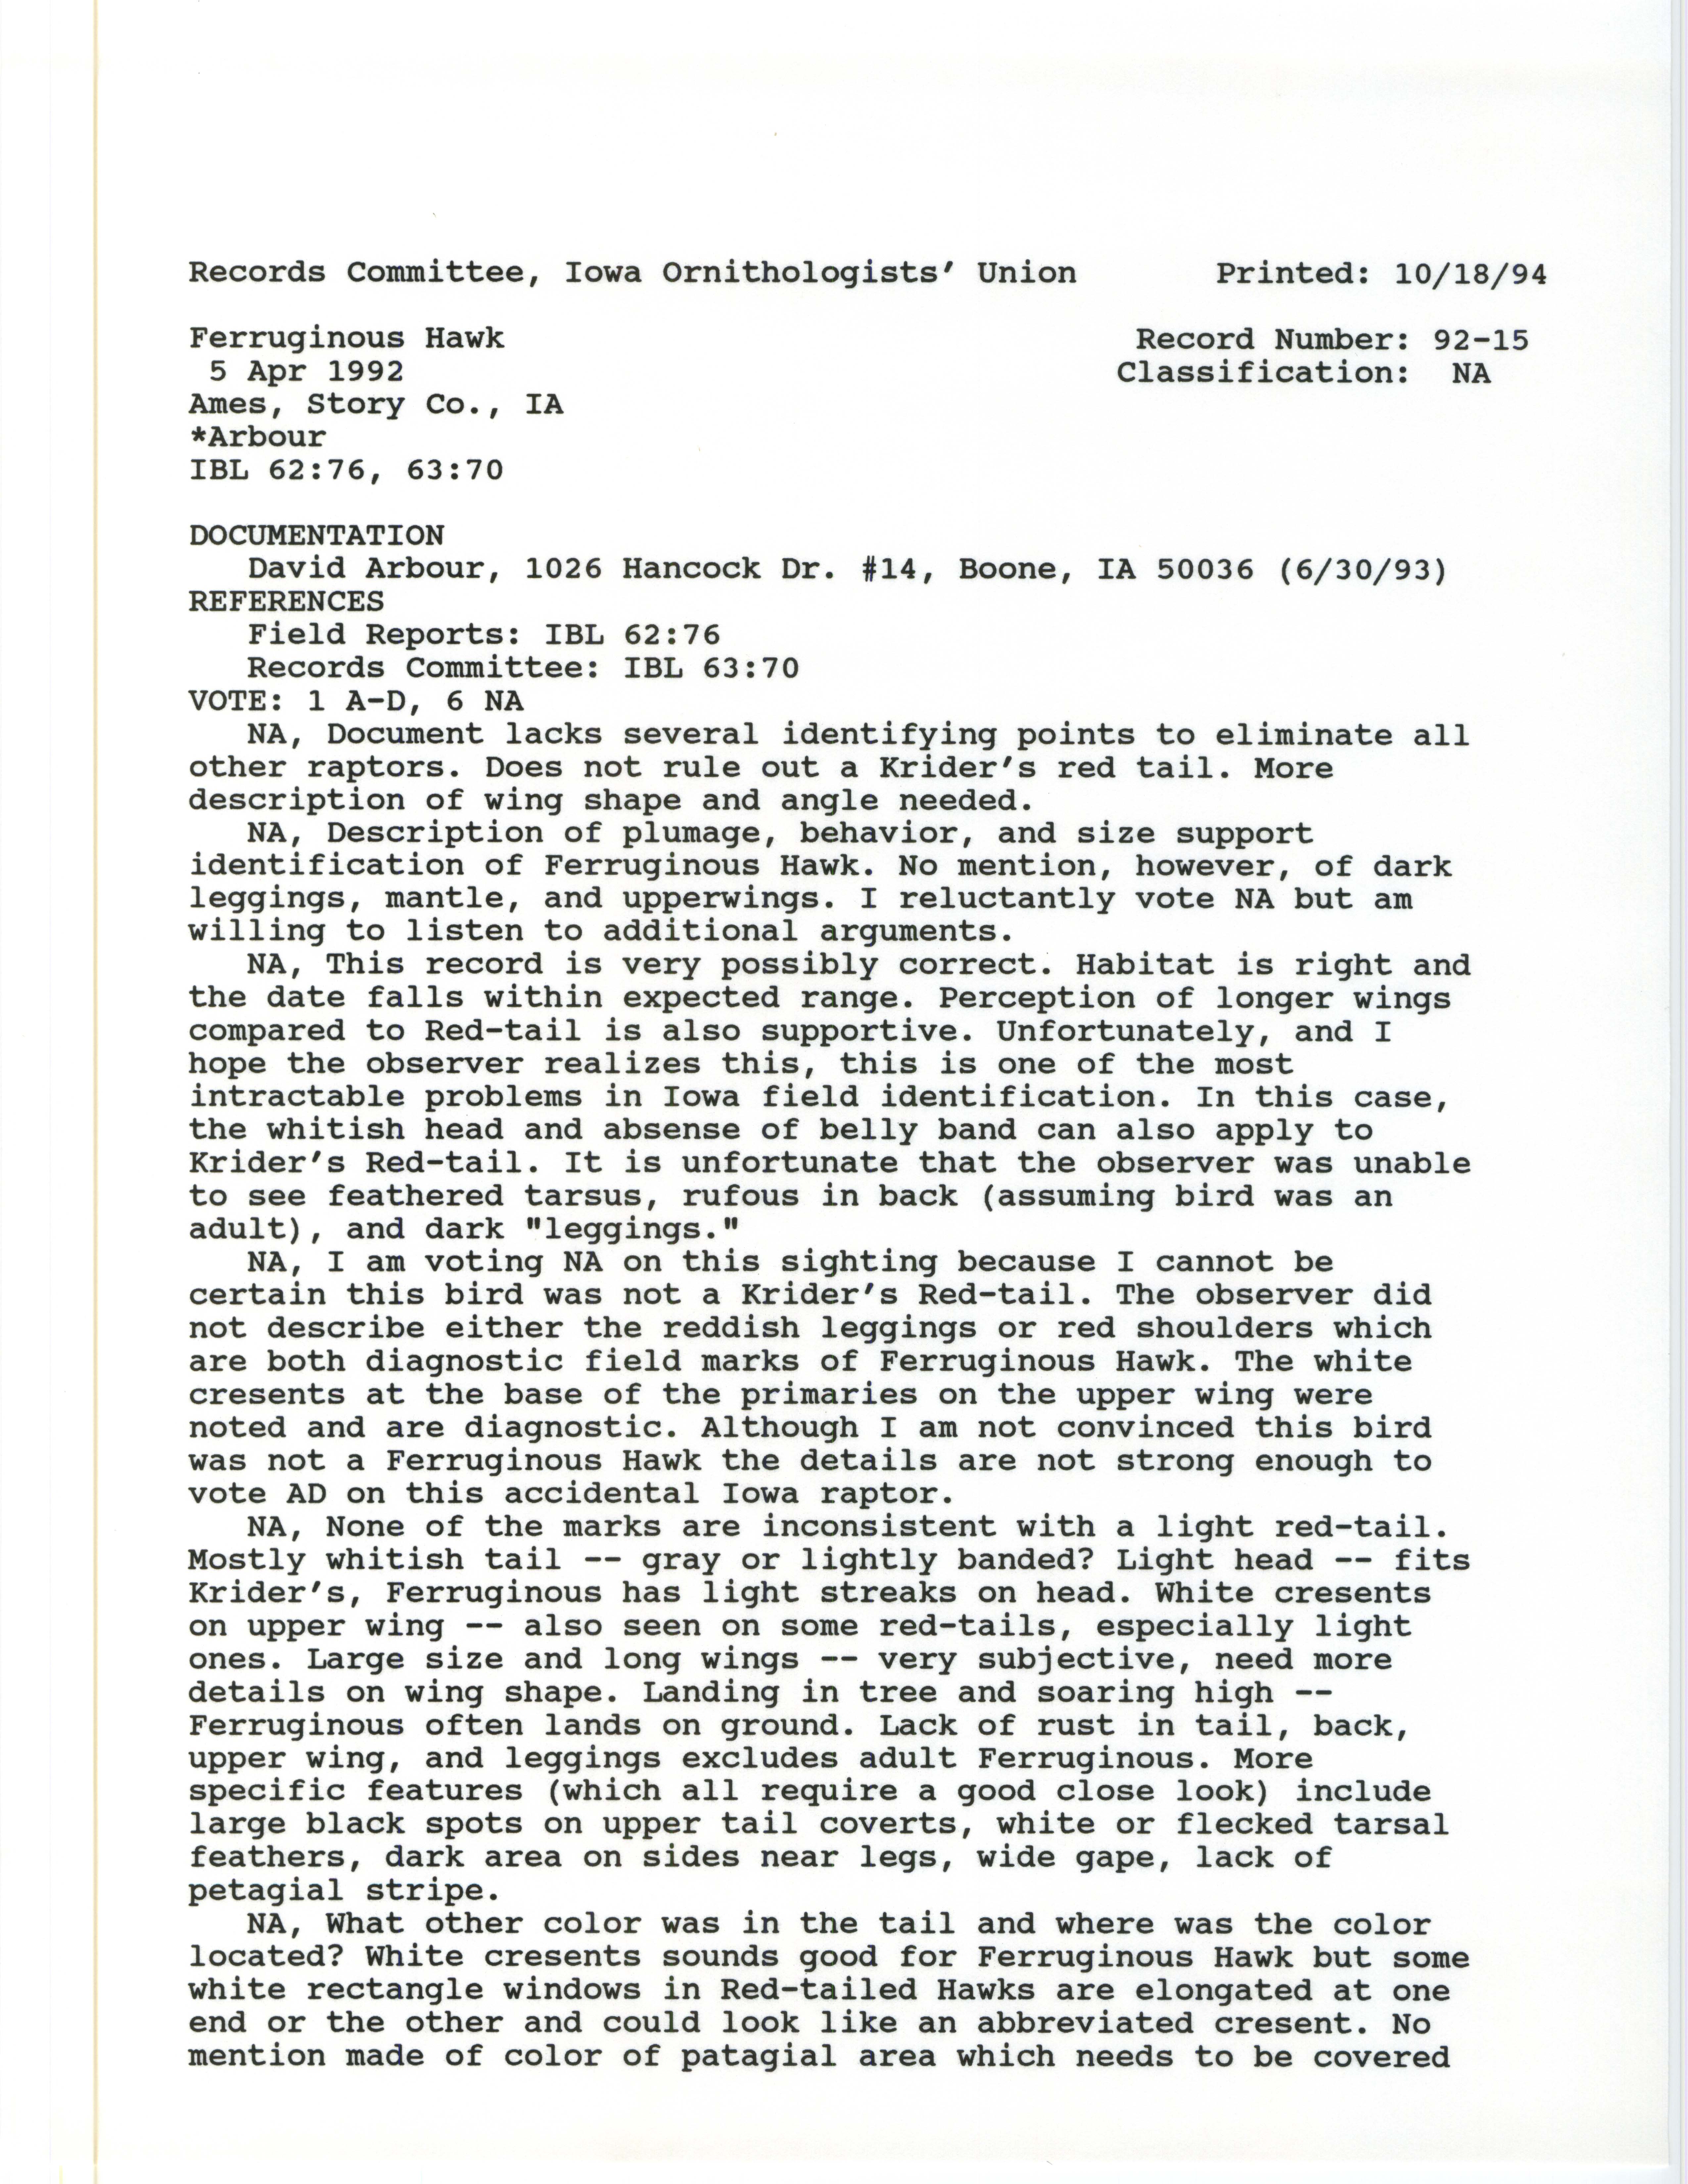 Records Committee review for rare bird sighting of Ferruginous Hawk at Ames, 1992